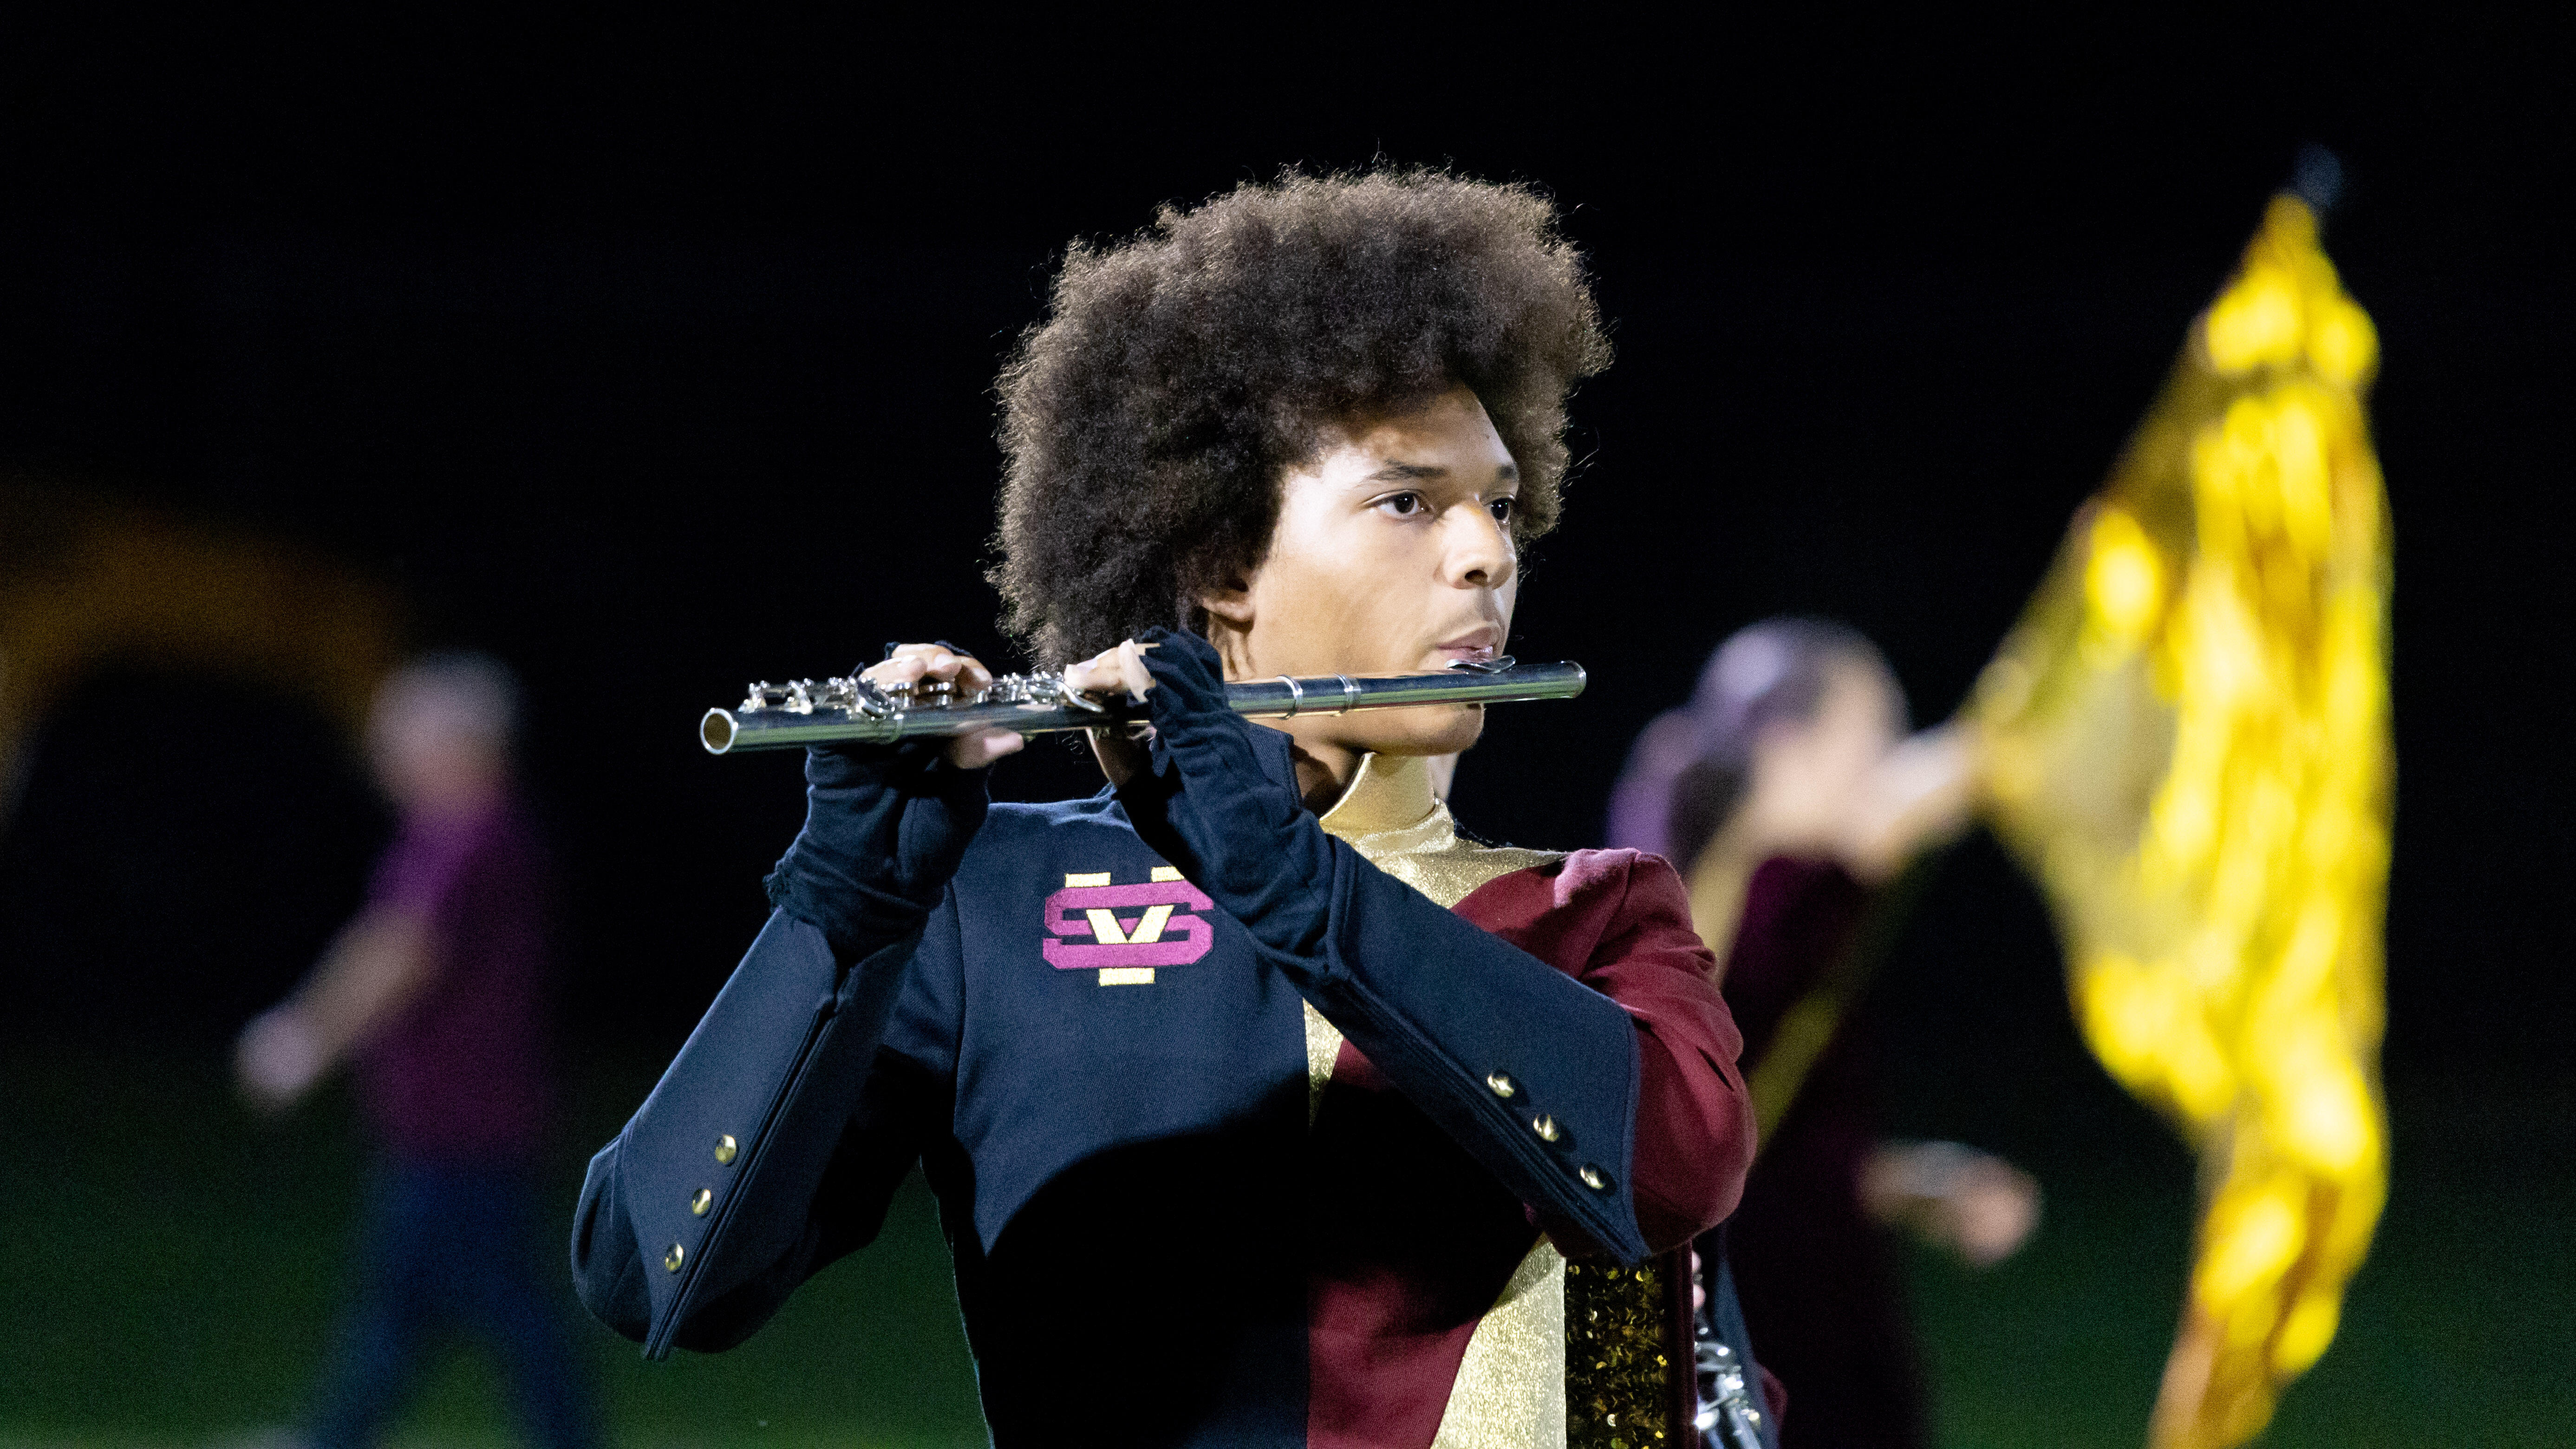 The Steel Valley Marching Band performs during halftime of a football game. Flute player Atreyu Convard is in the foreground.